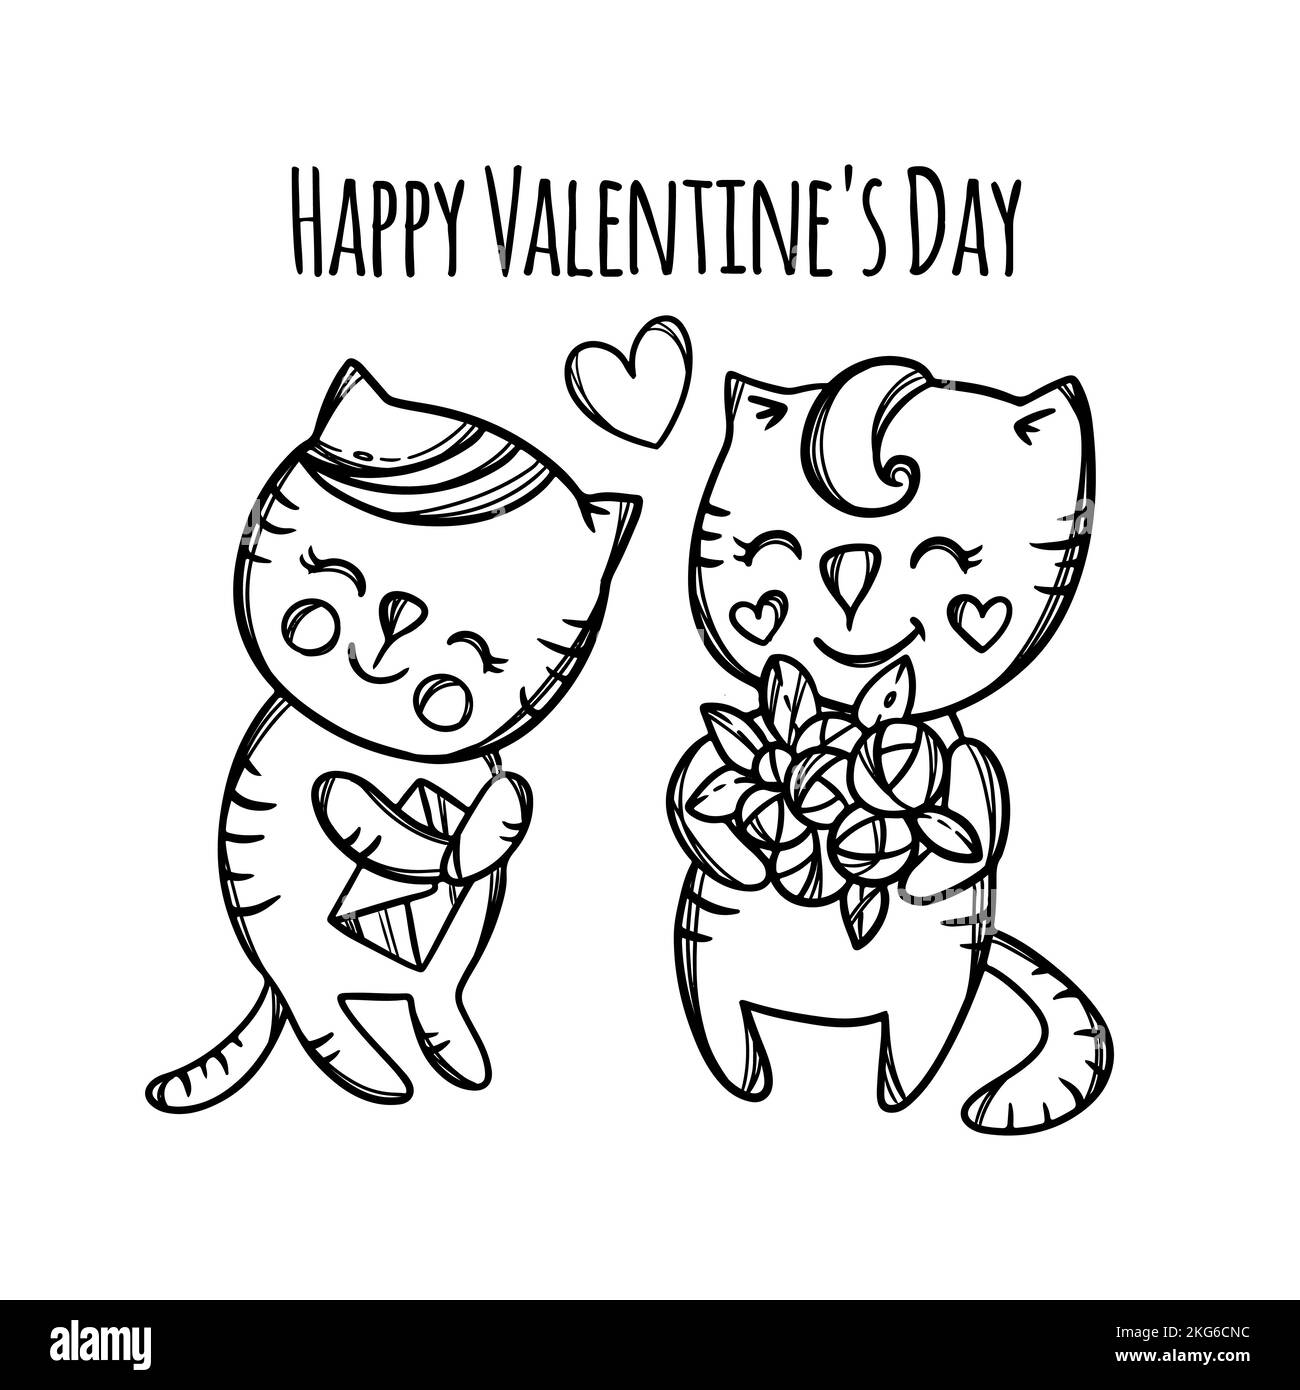 CAT GIVES FLOWERS To Her Beloved Kitty Who Is Confused Day Of Lovers Valentine Cartoon Animals Monochrome Hand Drawn Clip Art Vector Illustration For Stock Vector